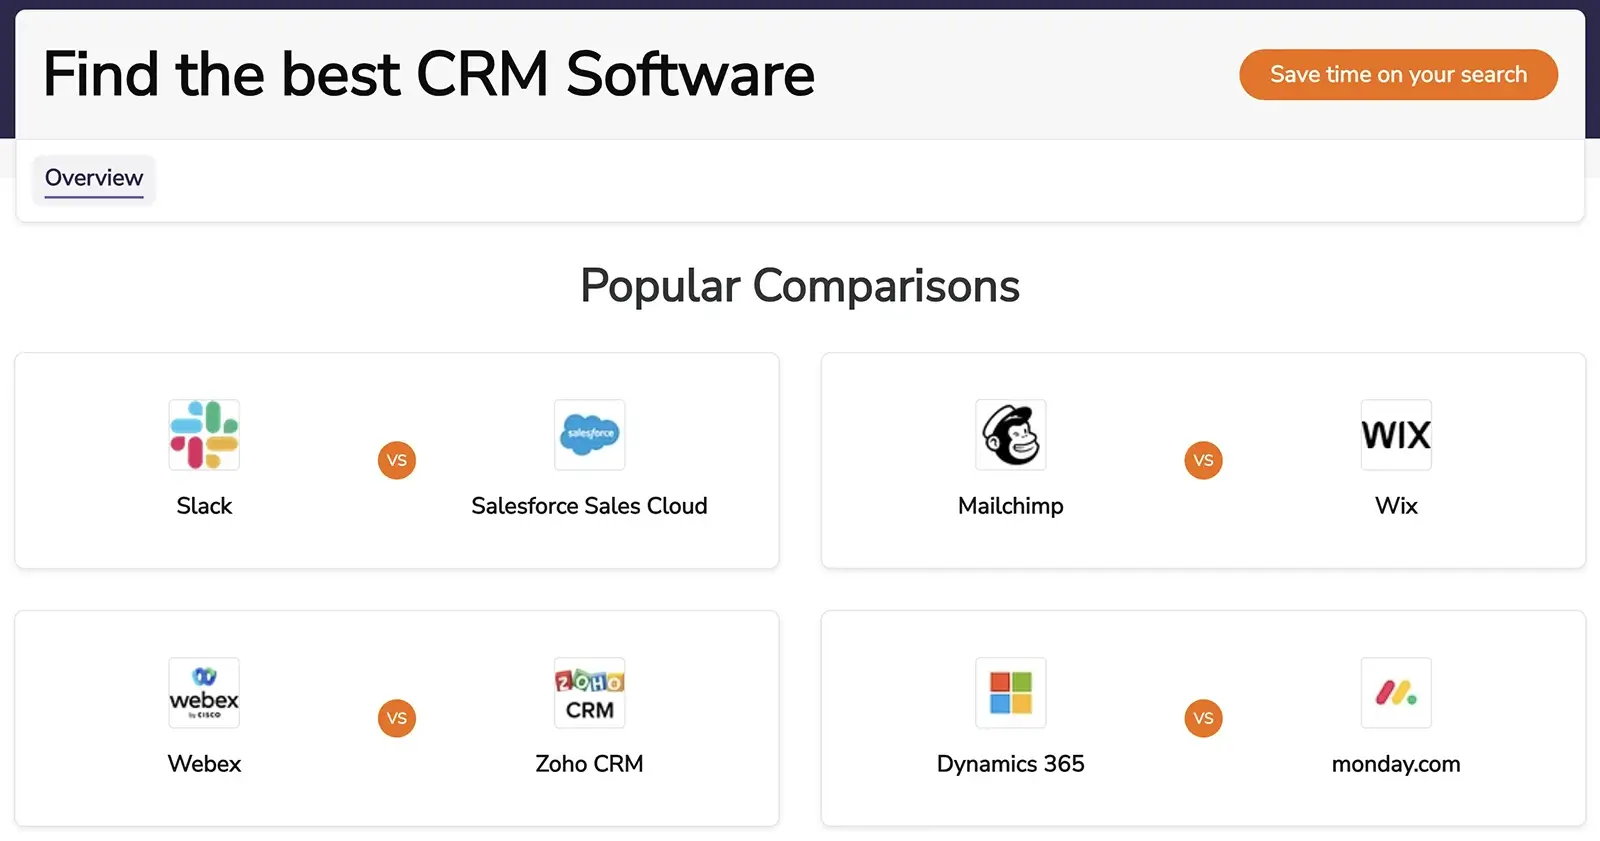 Find the best CRM Software image